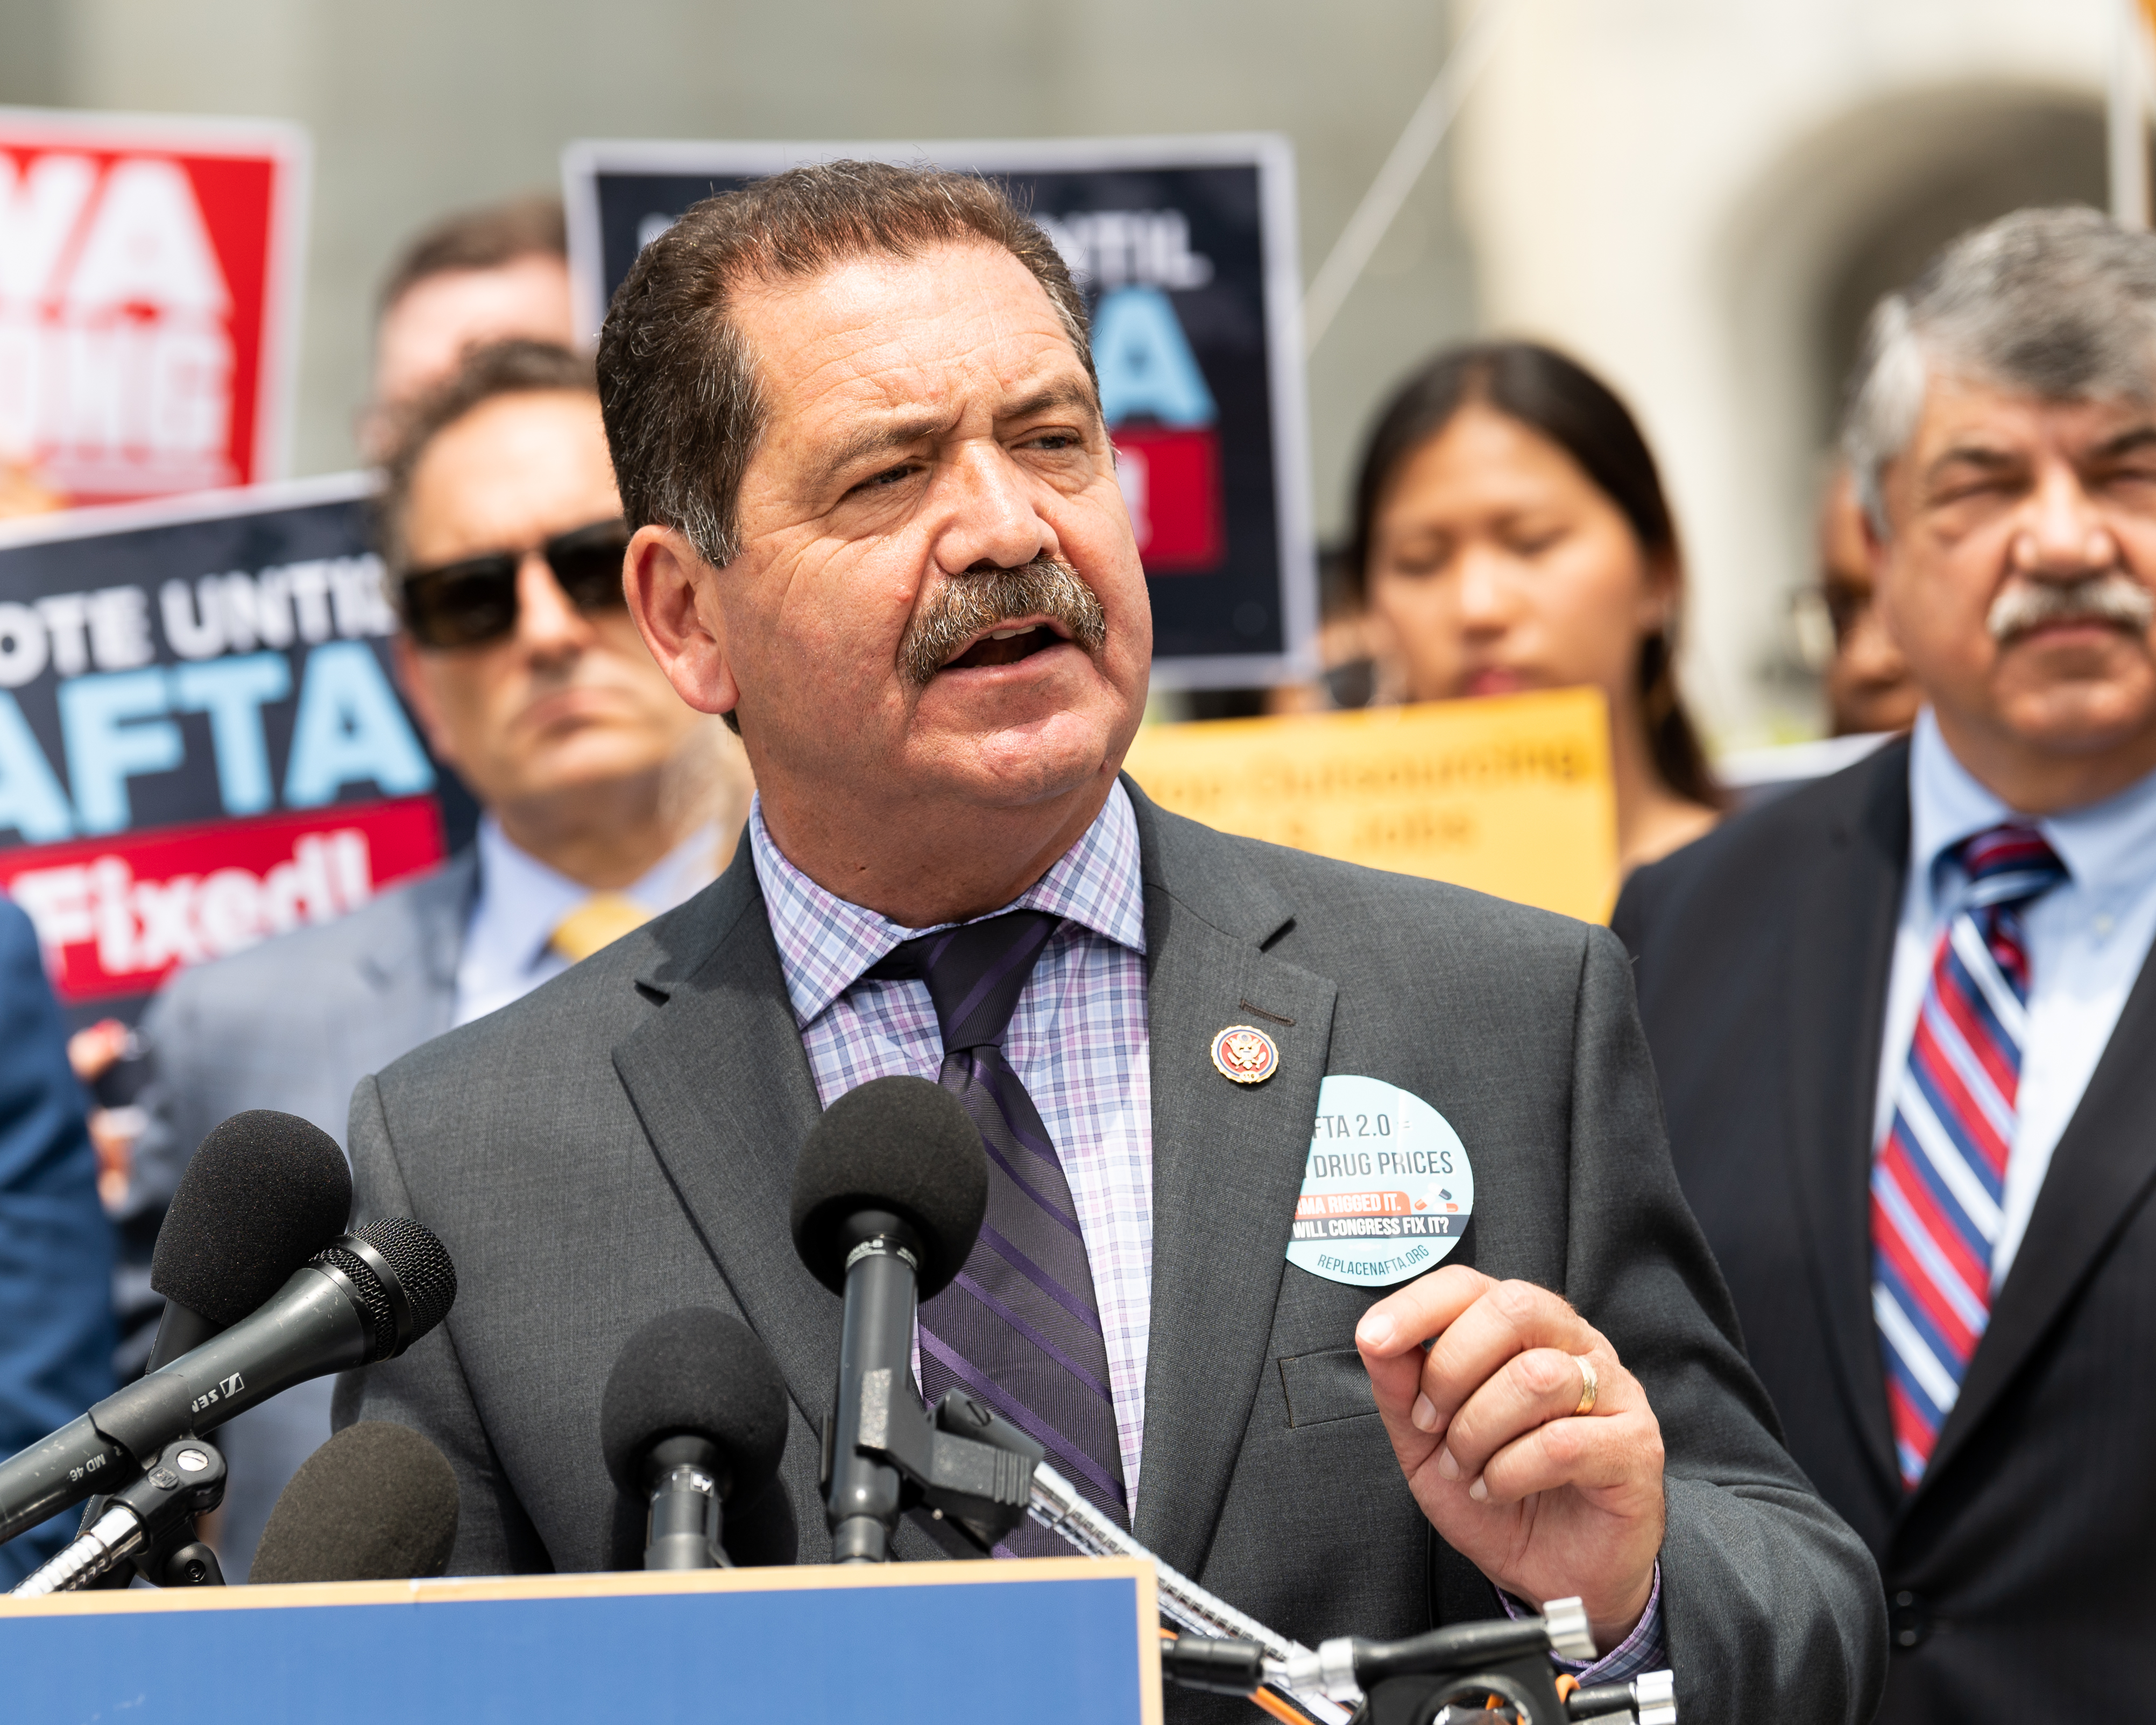 Mayoral Candidate Chuy Garcia Mentioned in Recording During Feds’ ComEd Probe – NBC Chicago